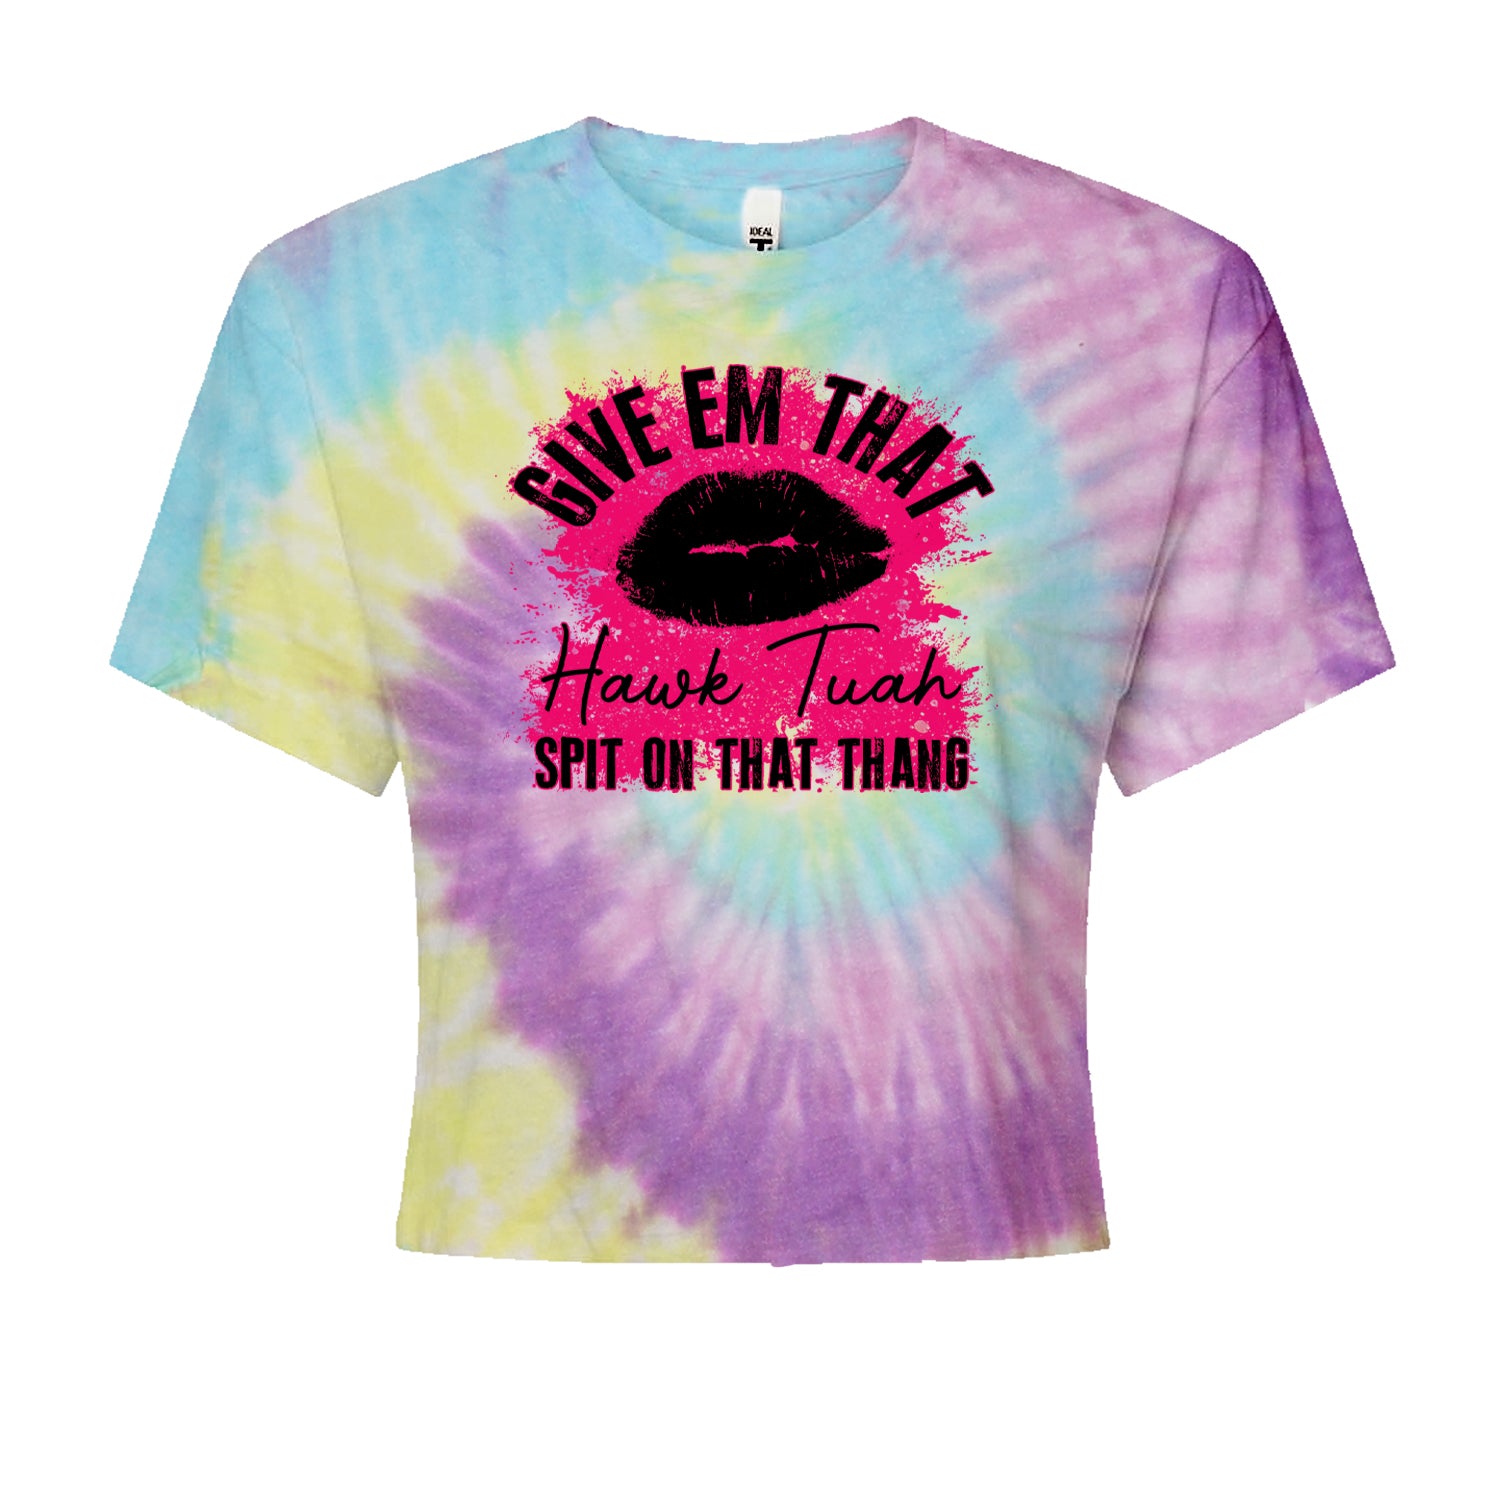 Give 'Em Hawk Tuah Spit On That Thang Cropped T-Shirt Jelly Bean